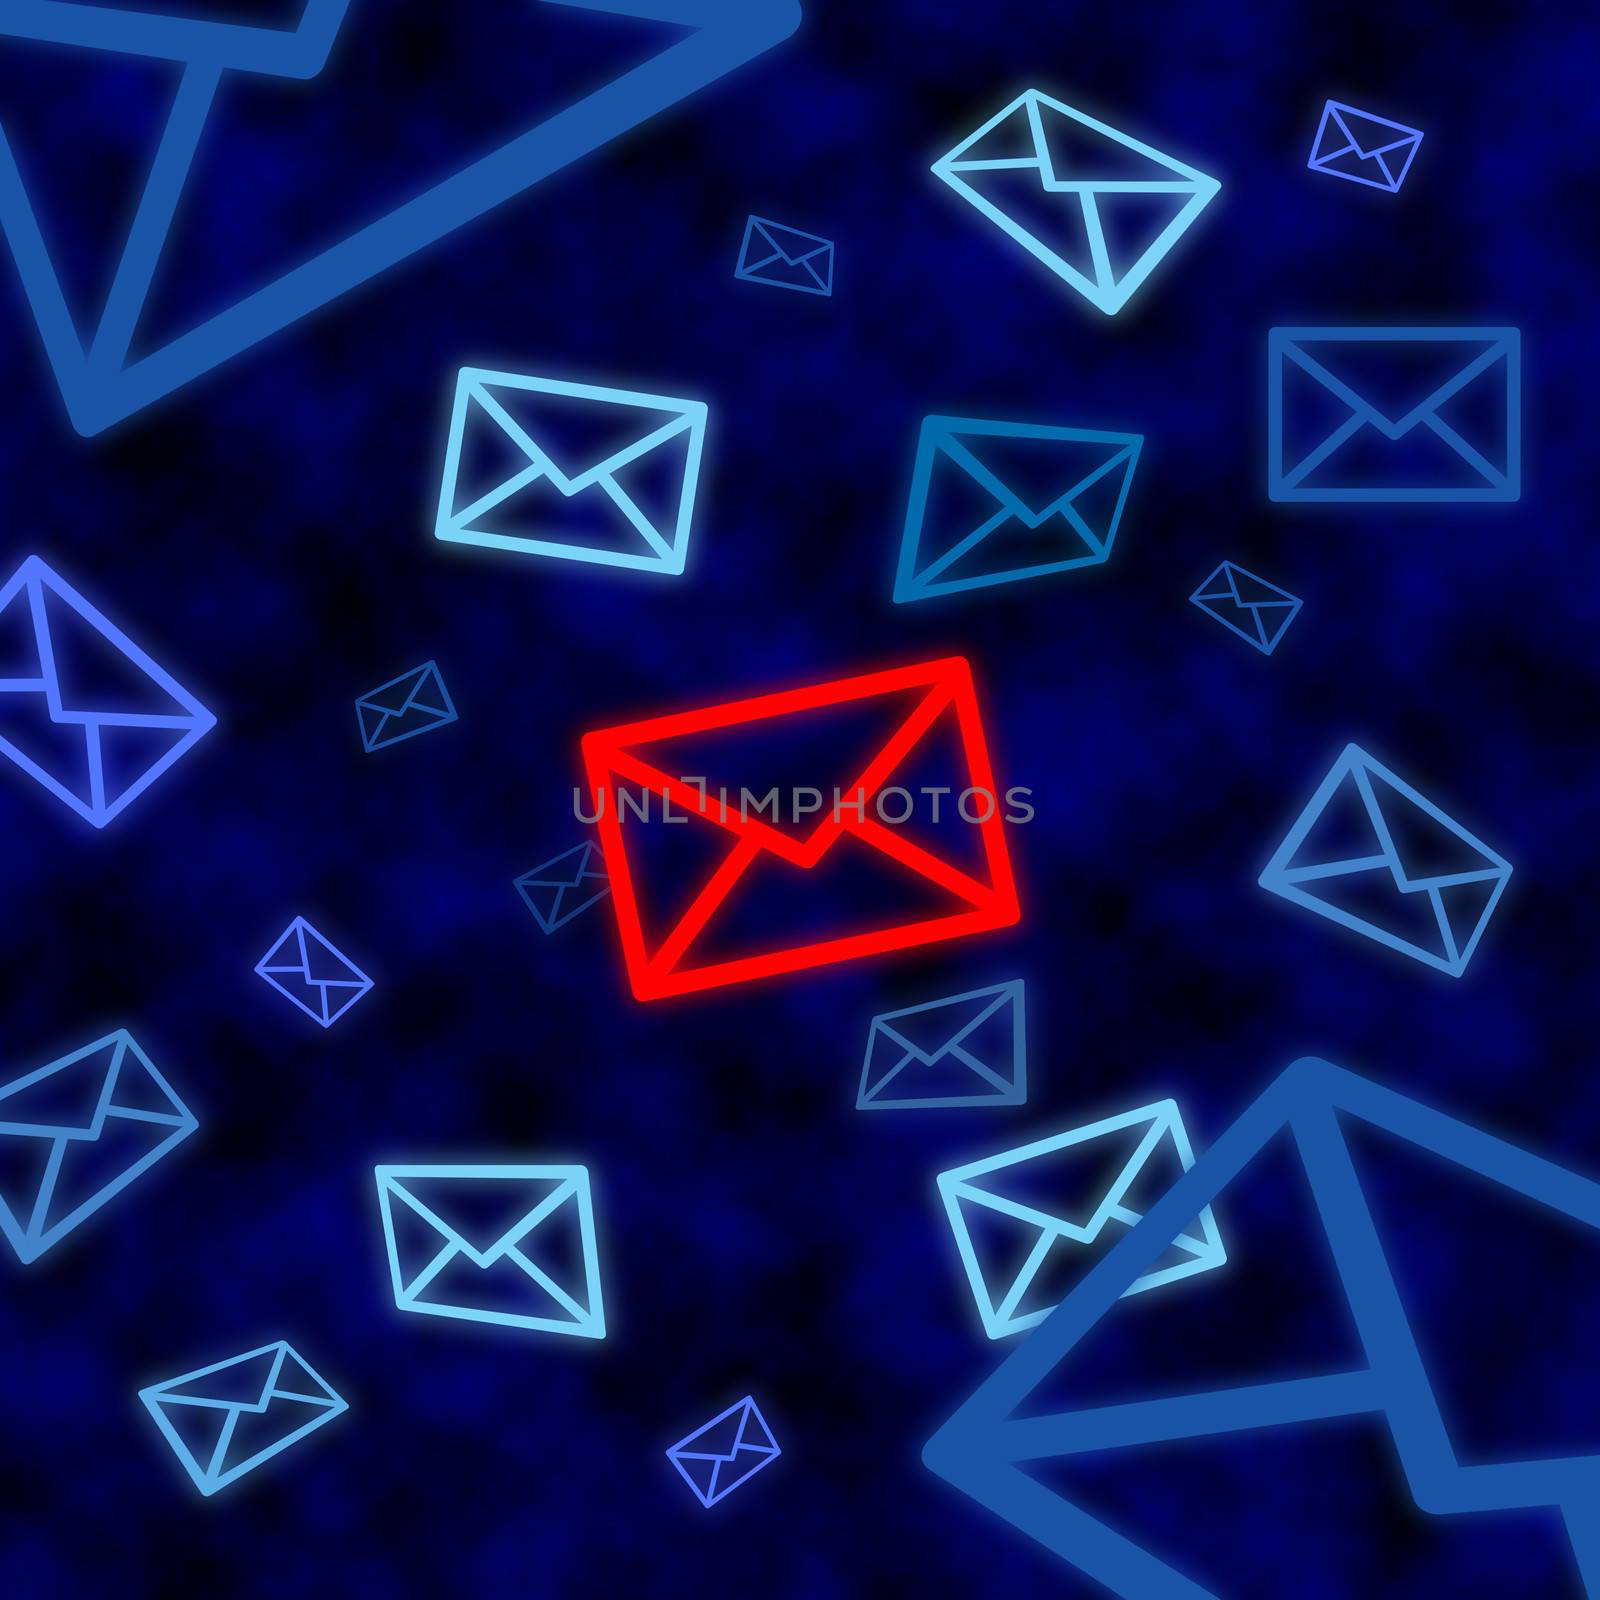 Email icon targeted by electronic surveillance in cyberspace by Balefire9